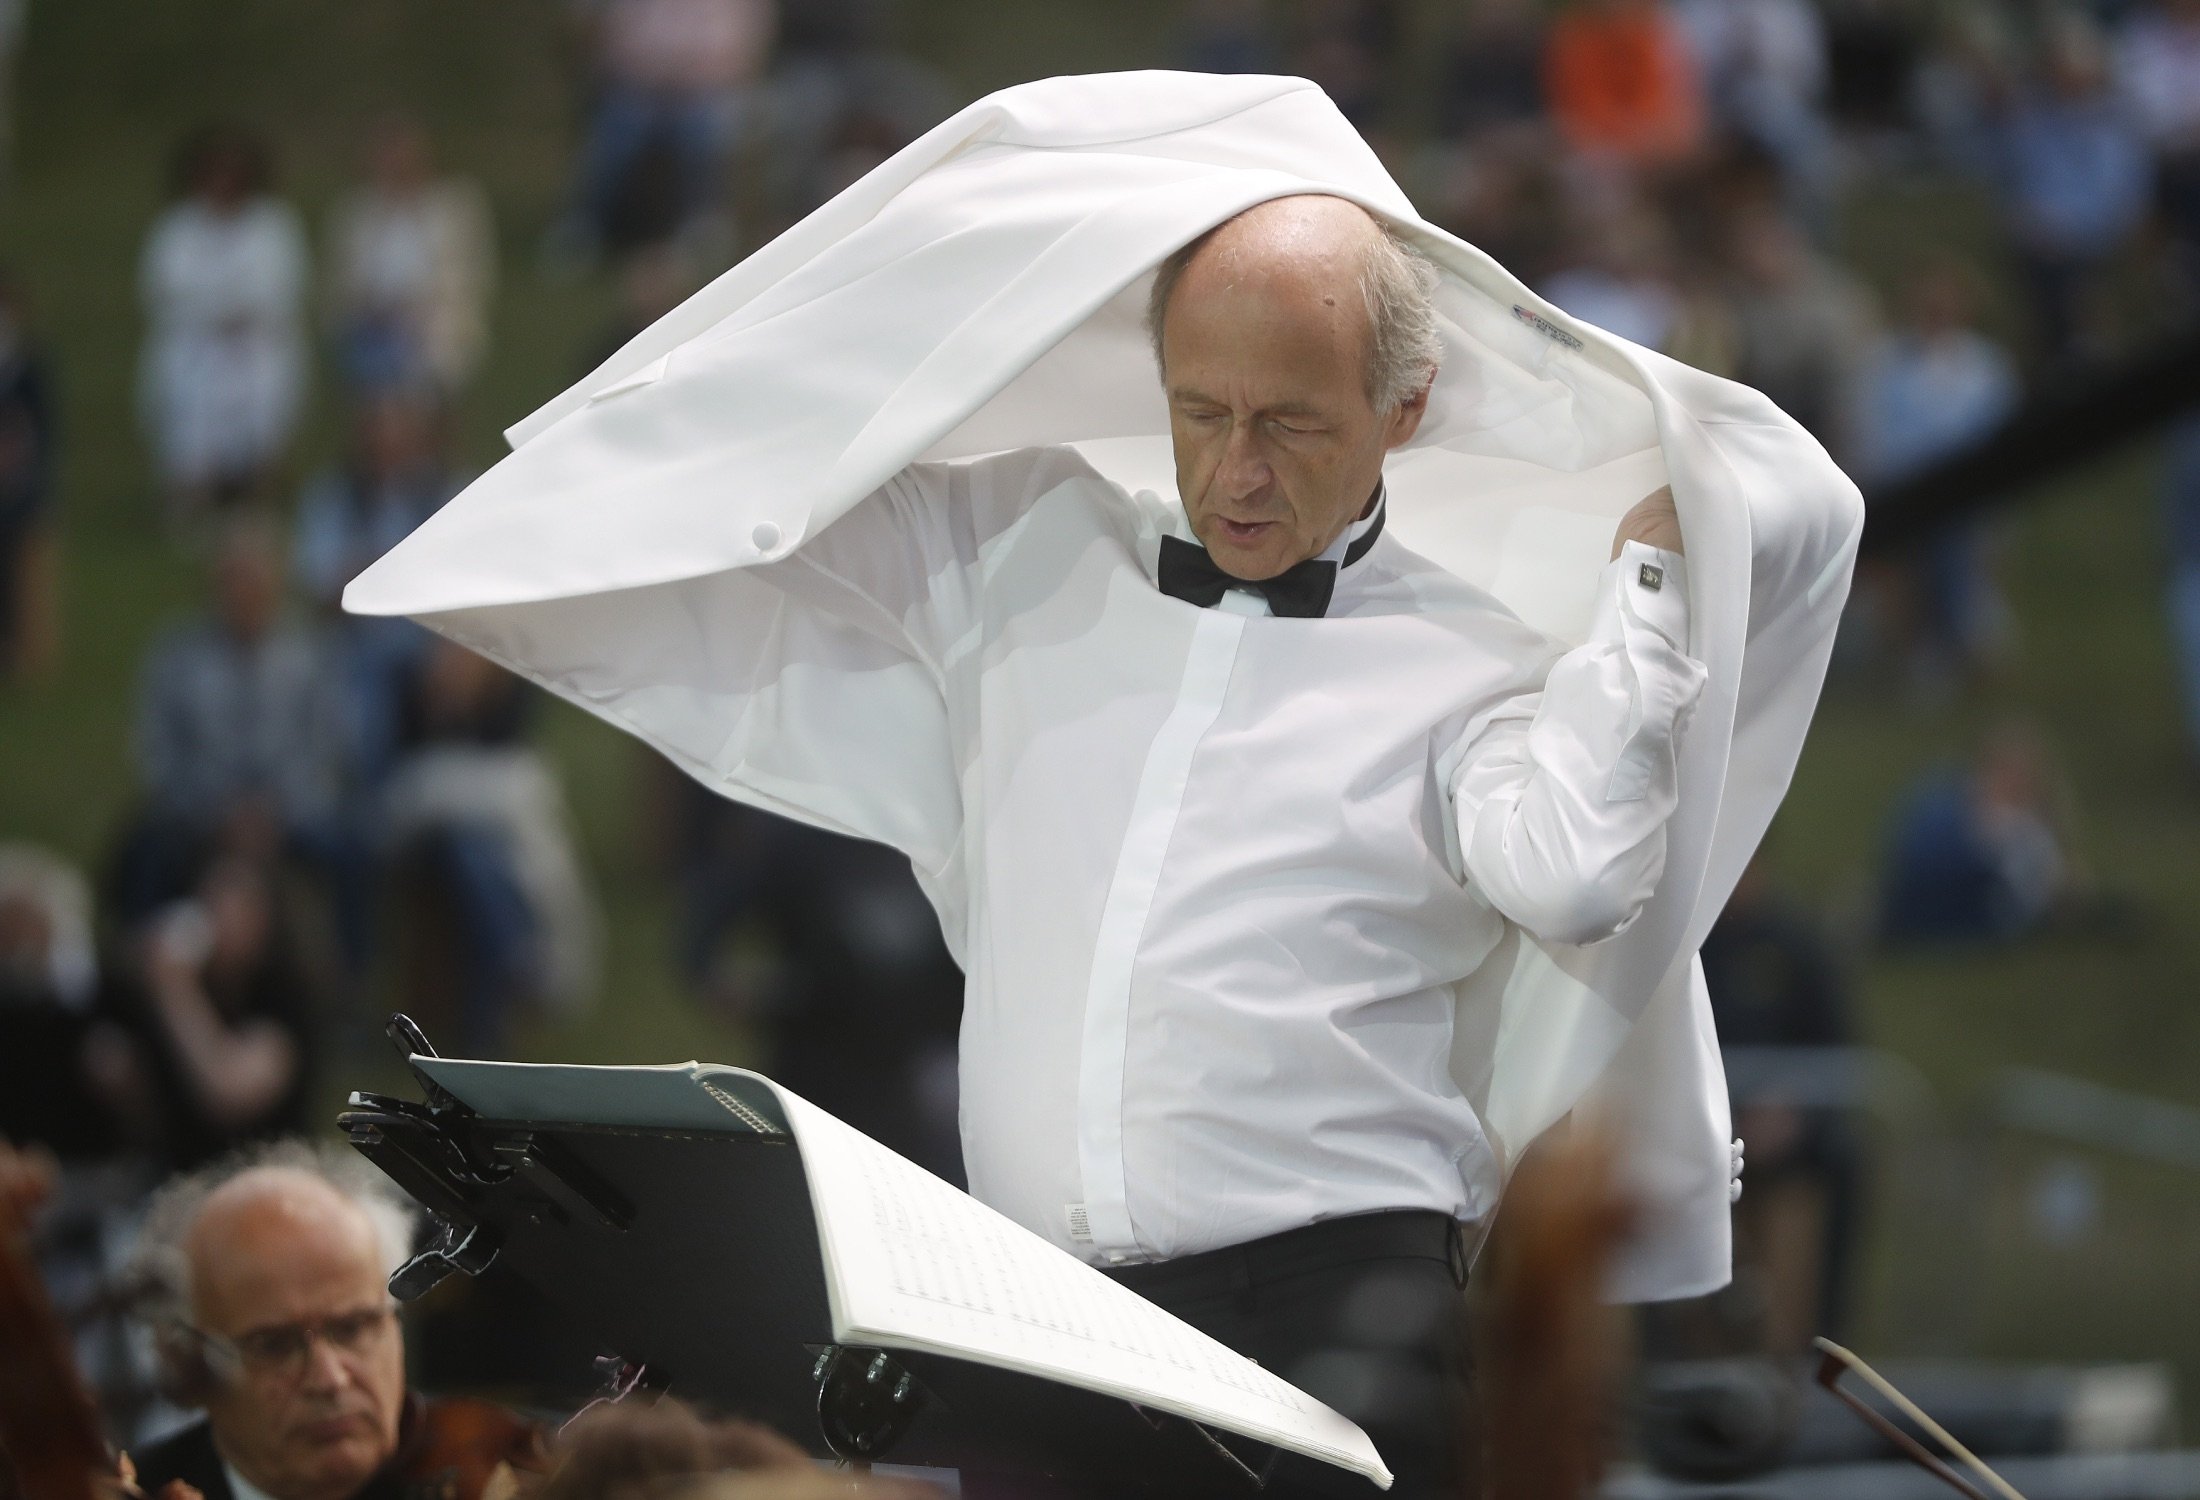 Ivan Fischer, the founder of the Budapest Festival Orchestra, adjusts his jacket after receiving his third dose of the COVID-19 vaccine during their free concert in Budapest, Hungary, Aug. 25, 2021. (AP Photo)